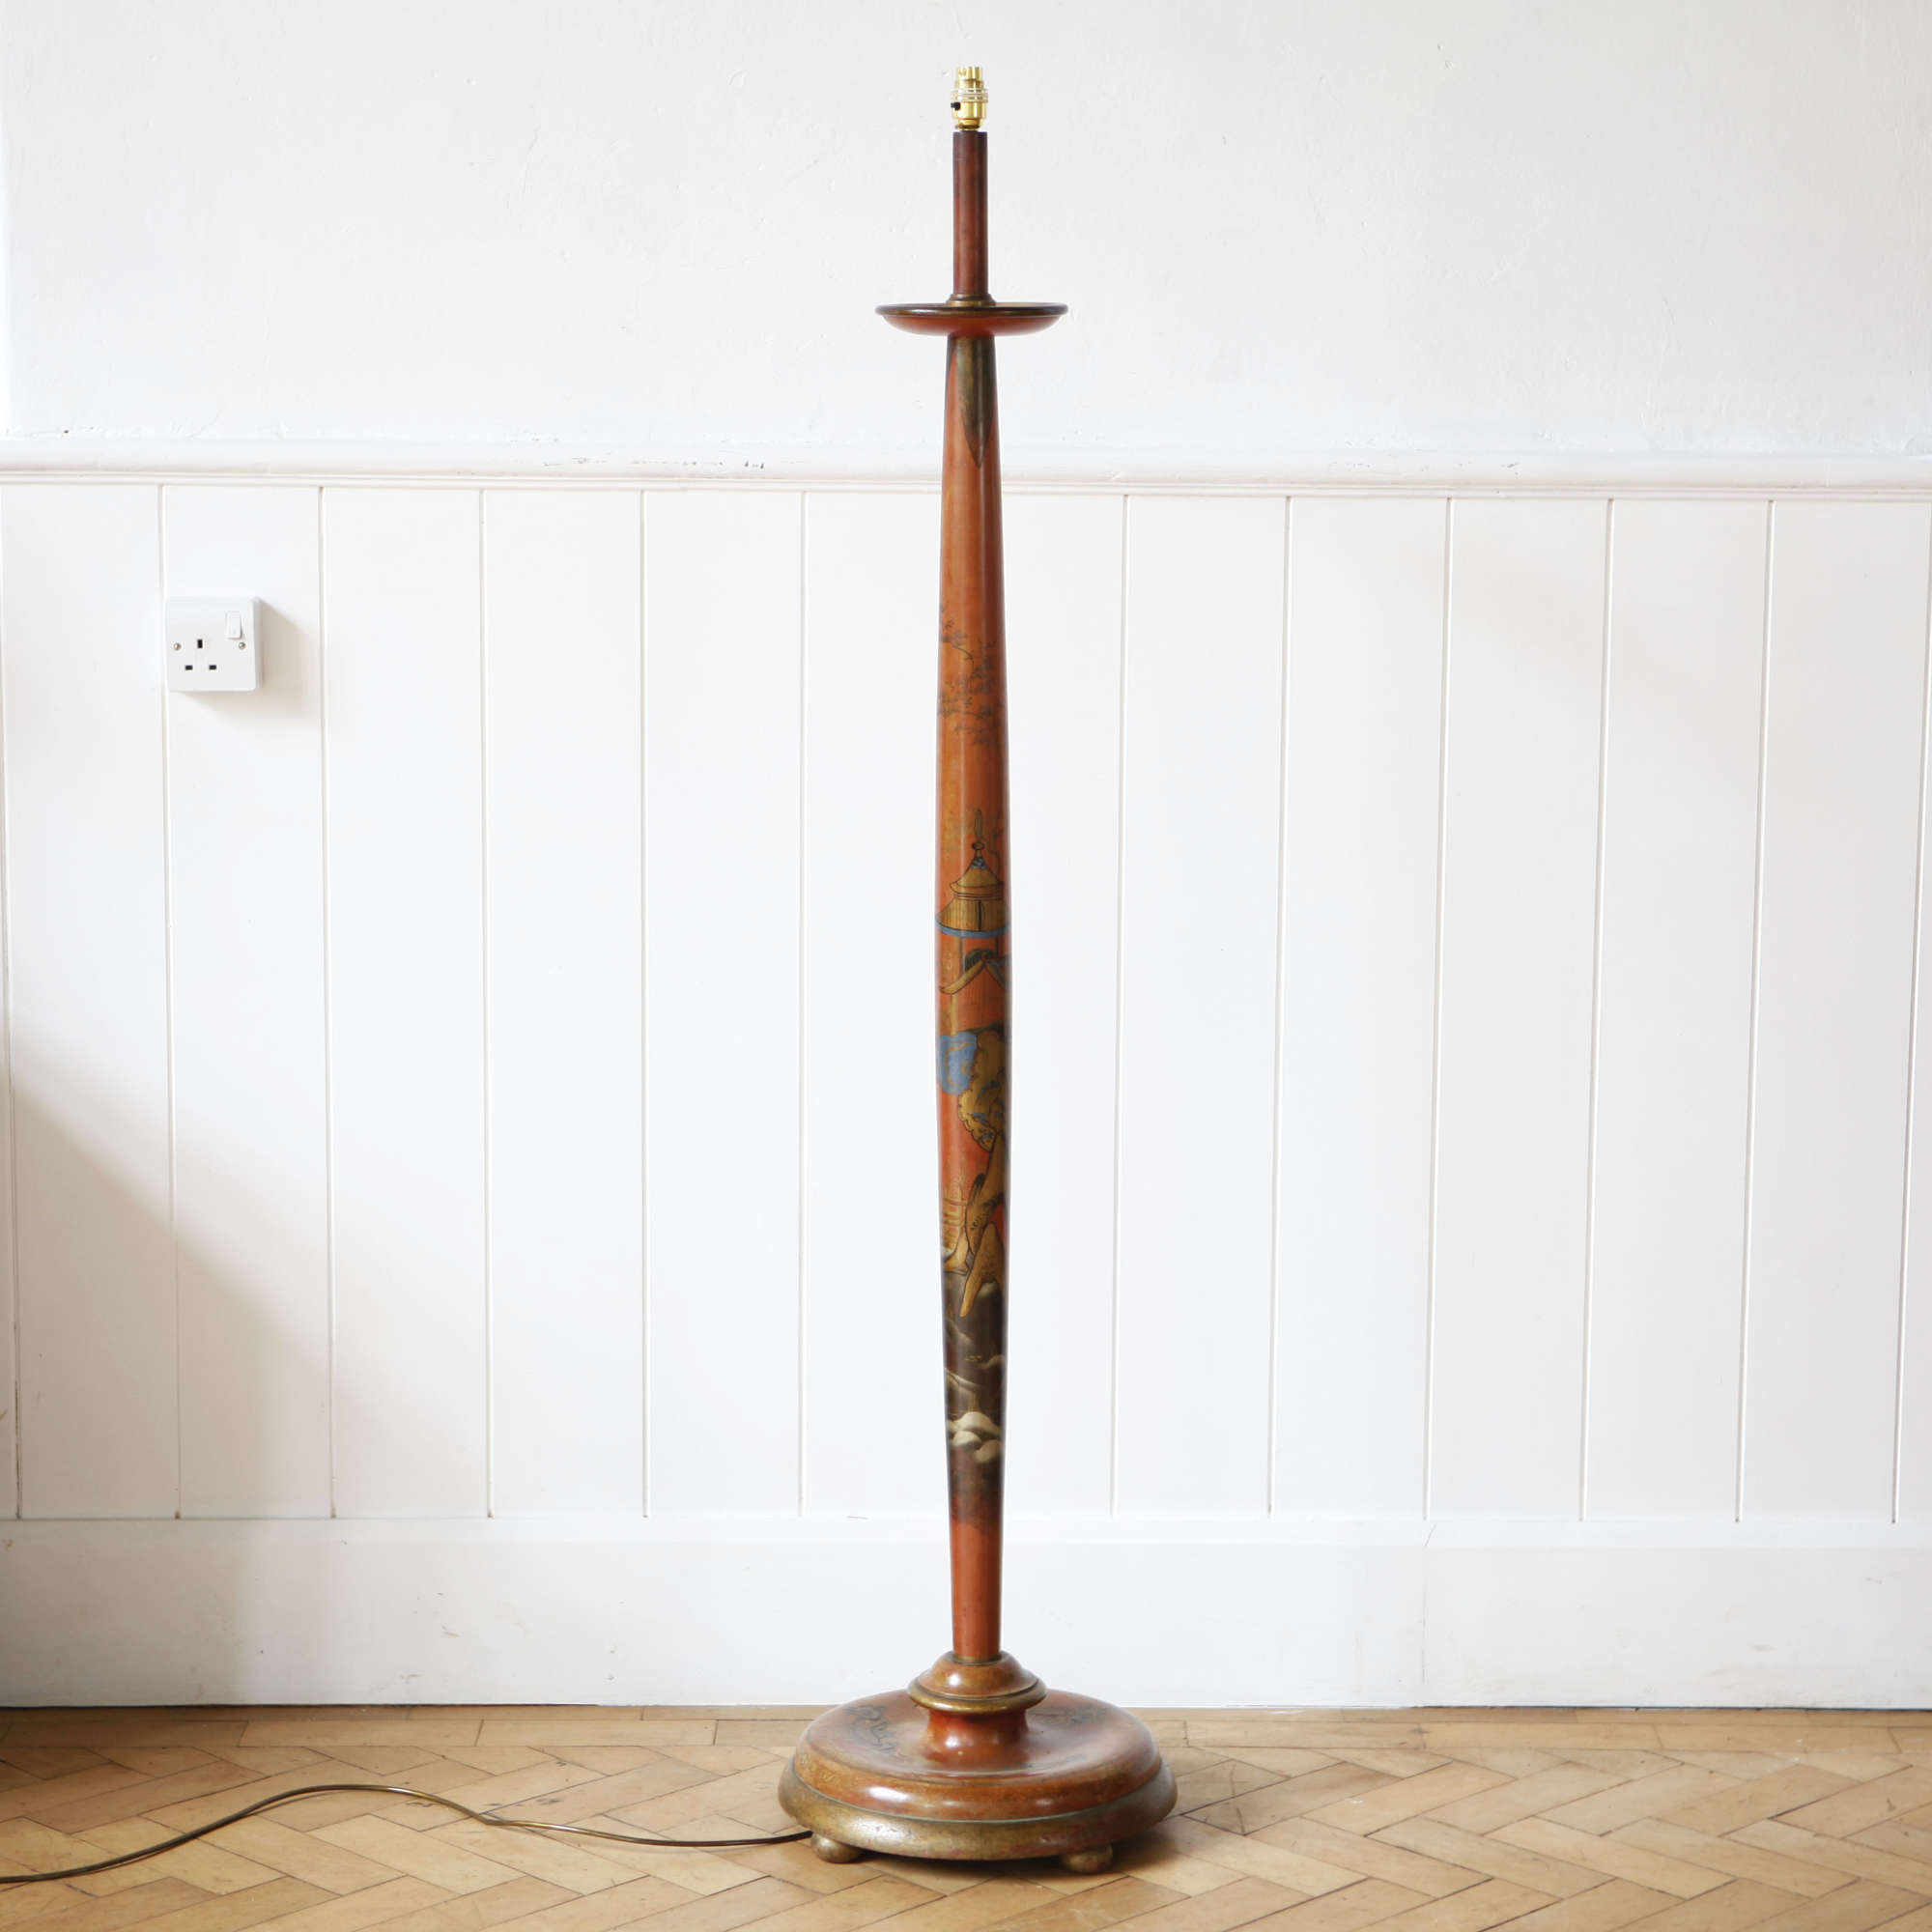 English country house chinoiserie floor lamp with original decoration.